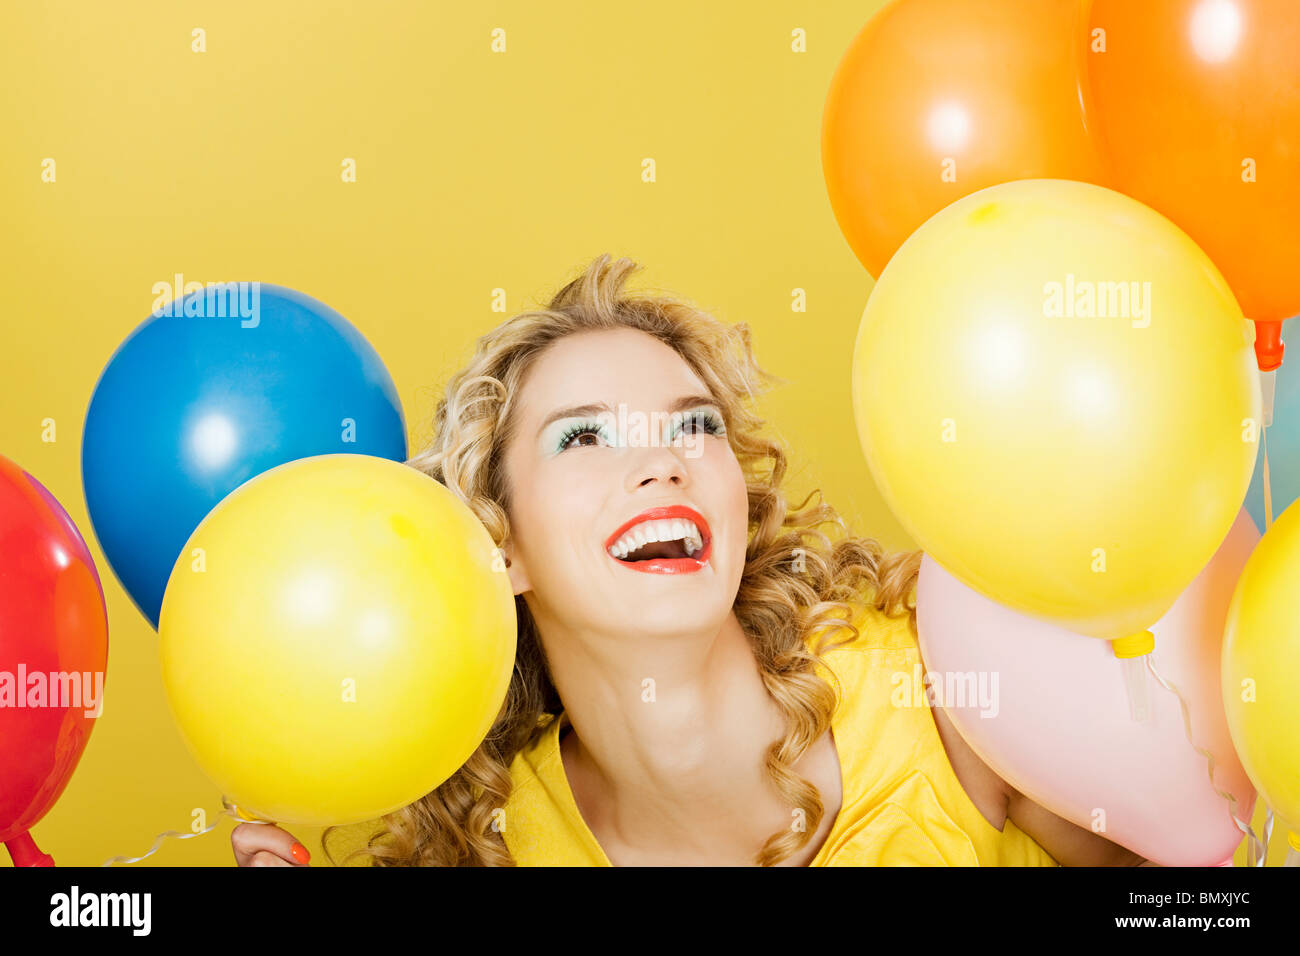 Young blonde woman with balloons against yellow background Stock Photo